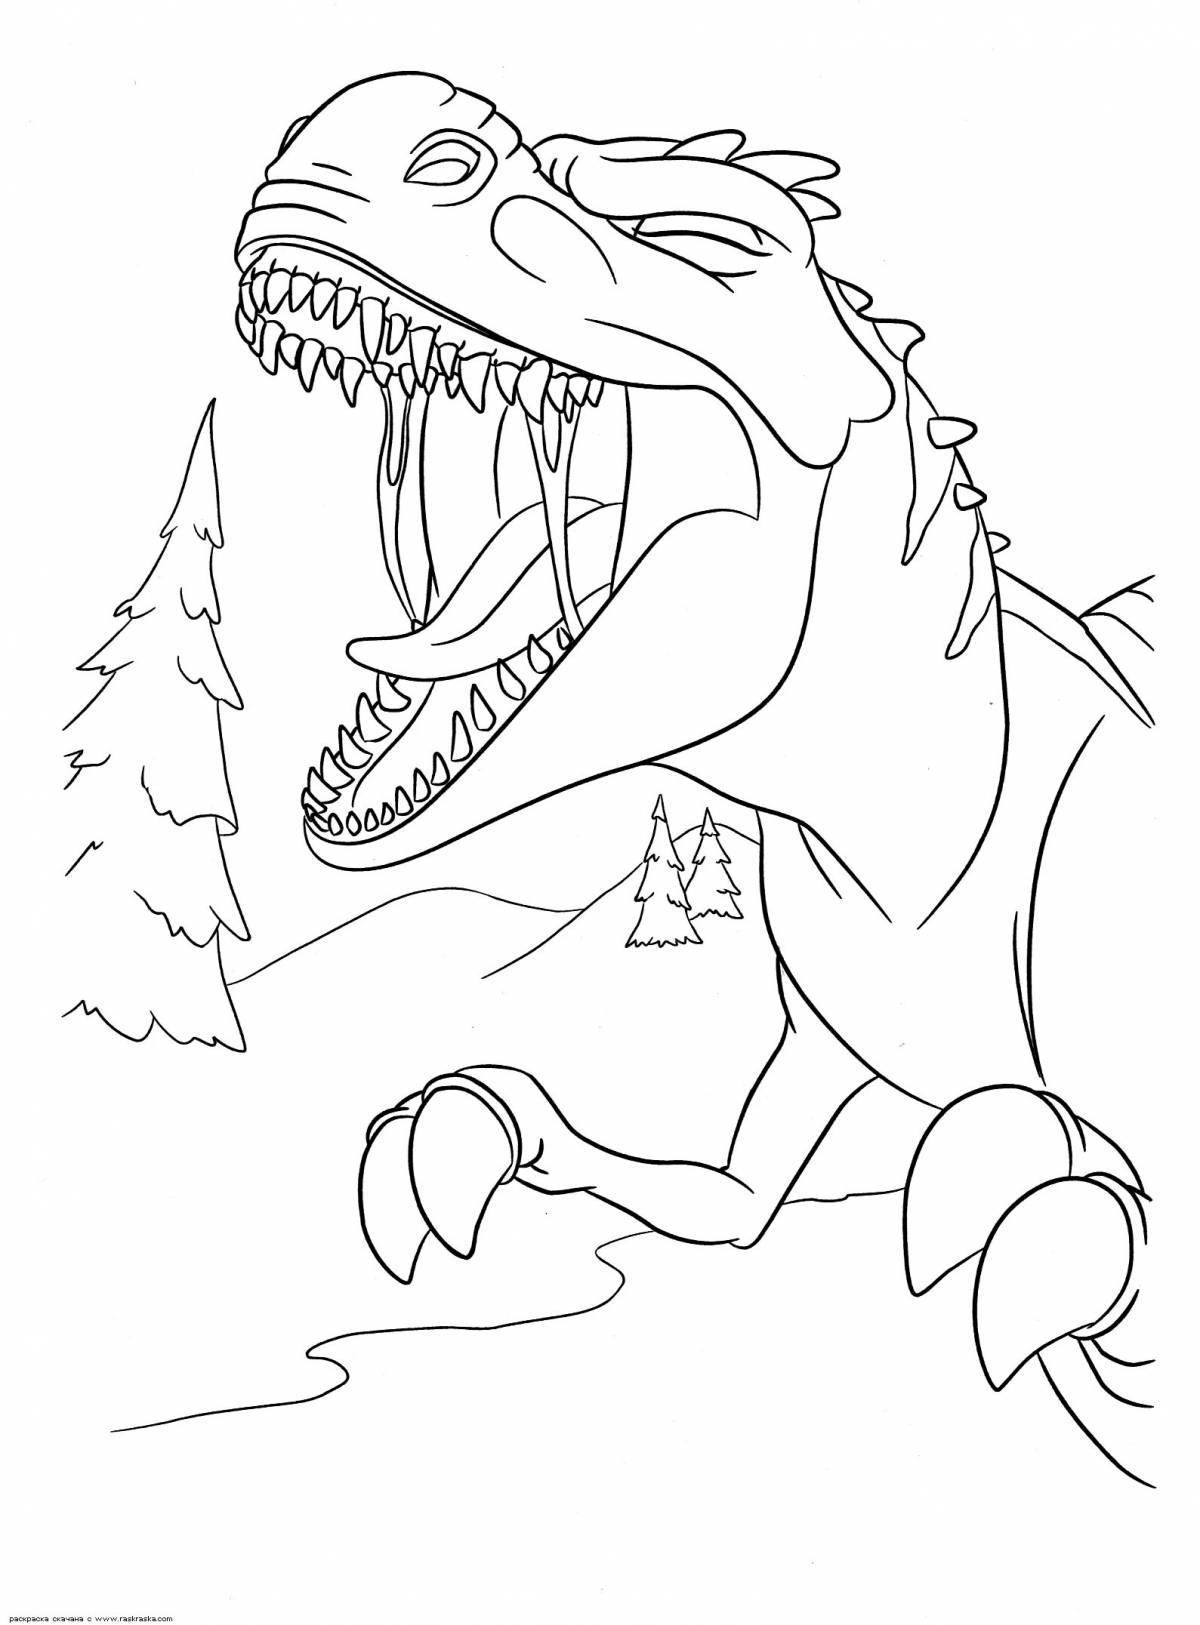 Exotic ice age dinosaur coloring book